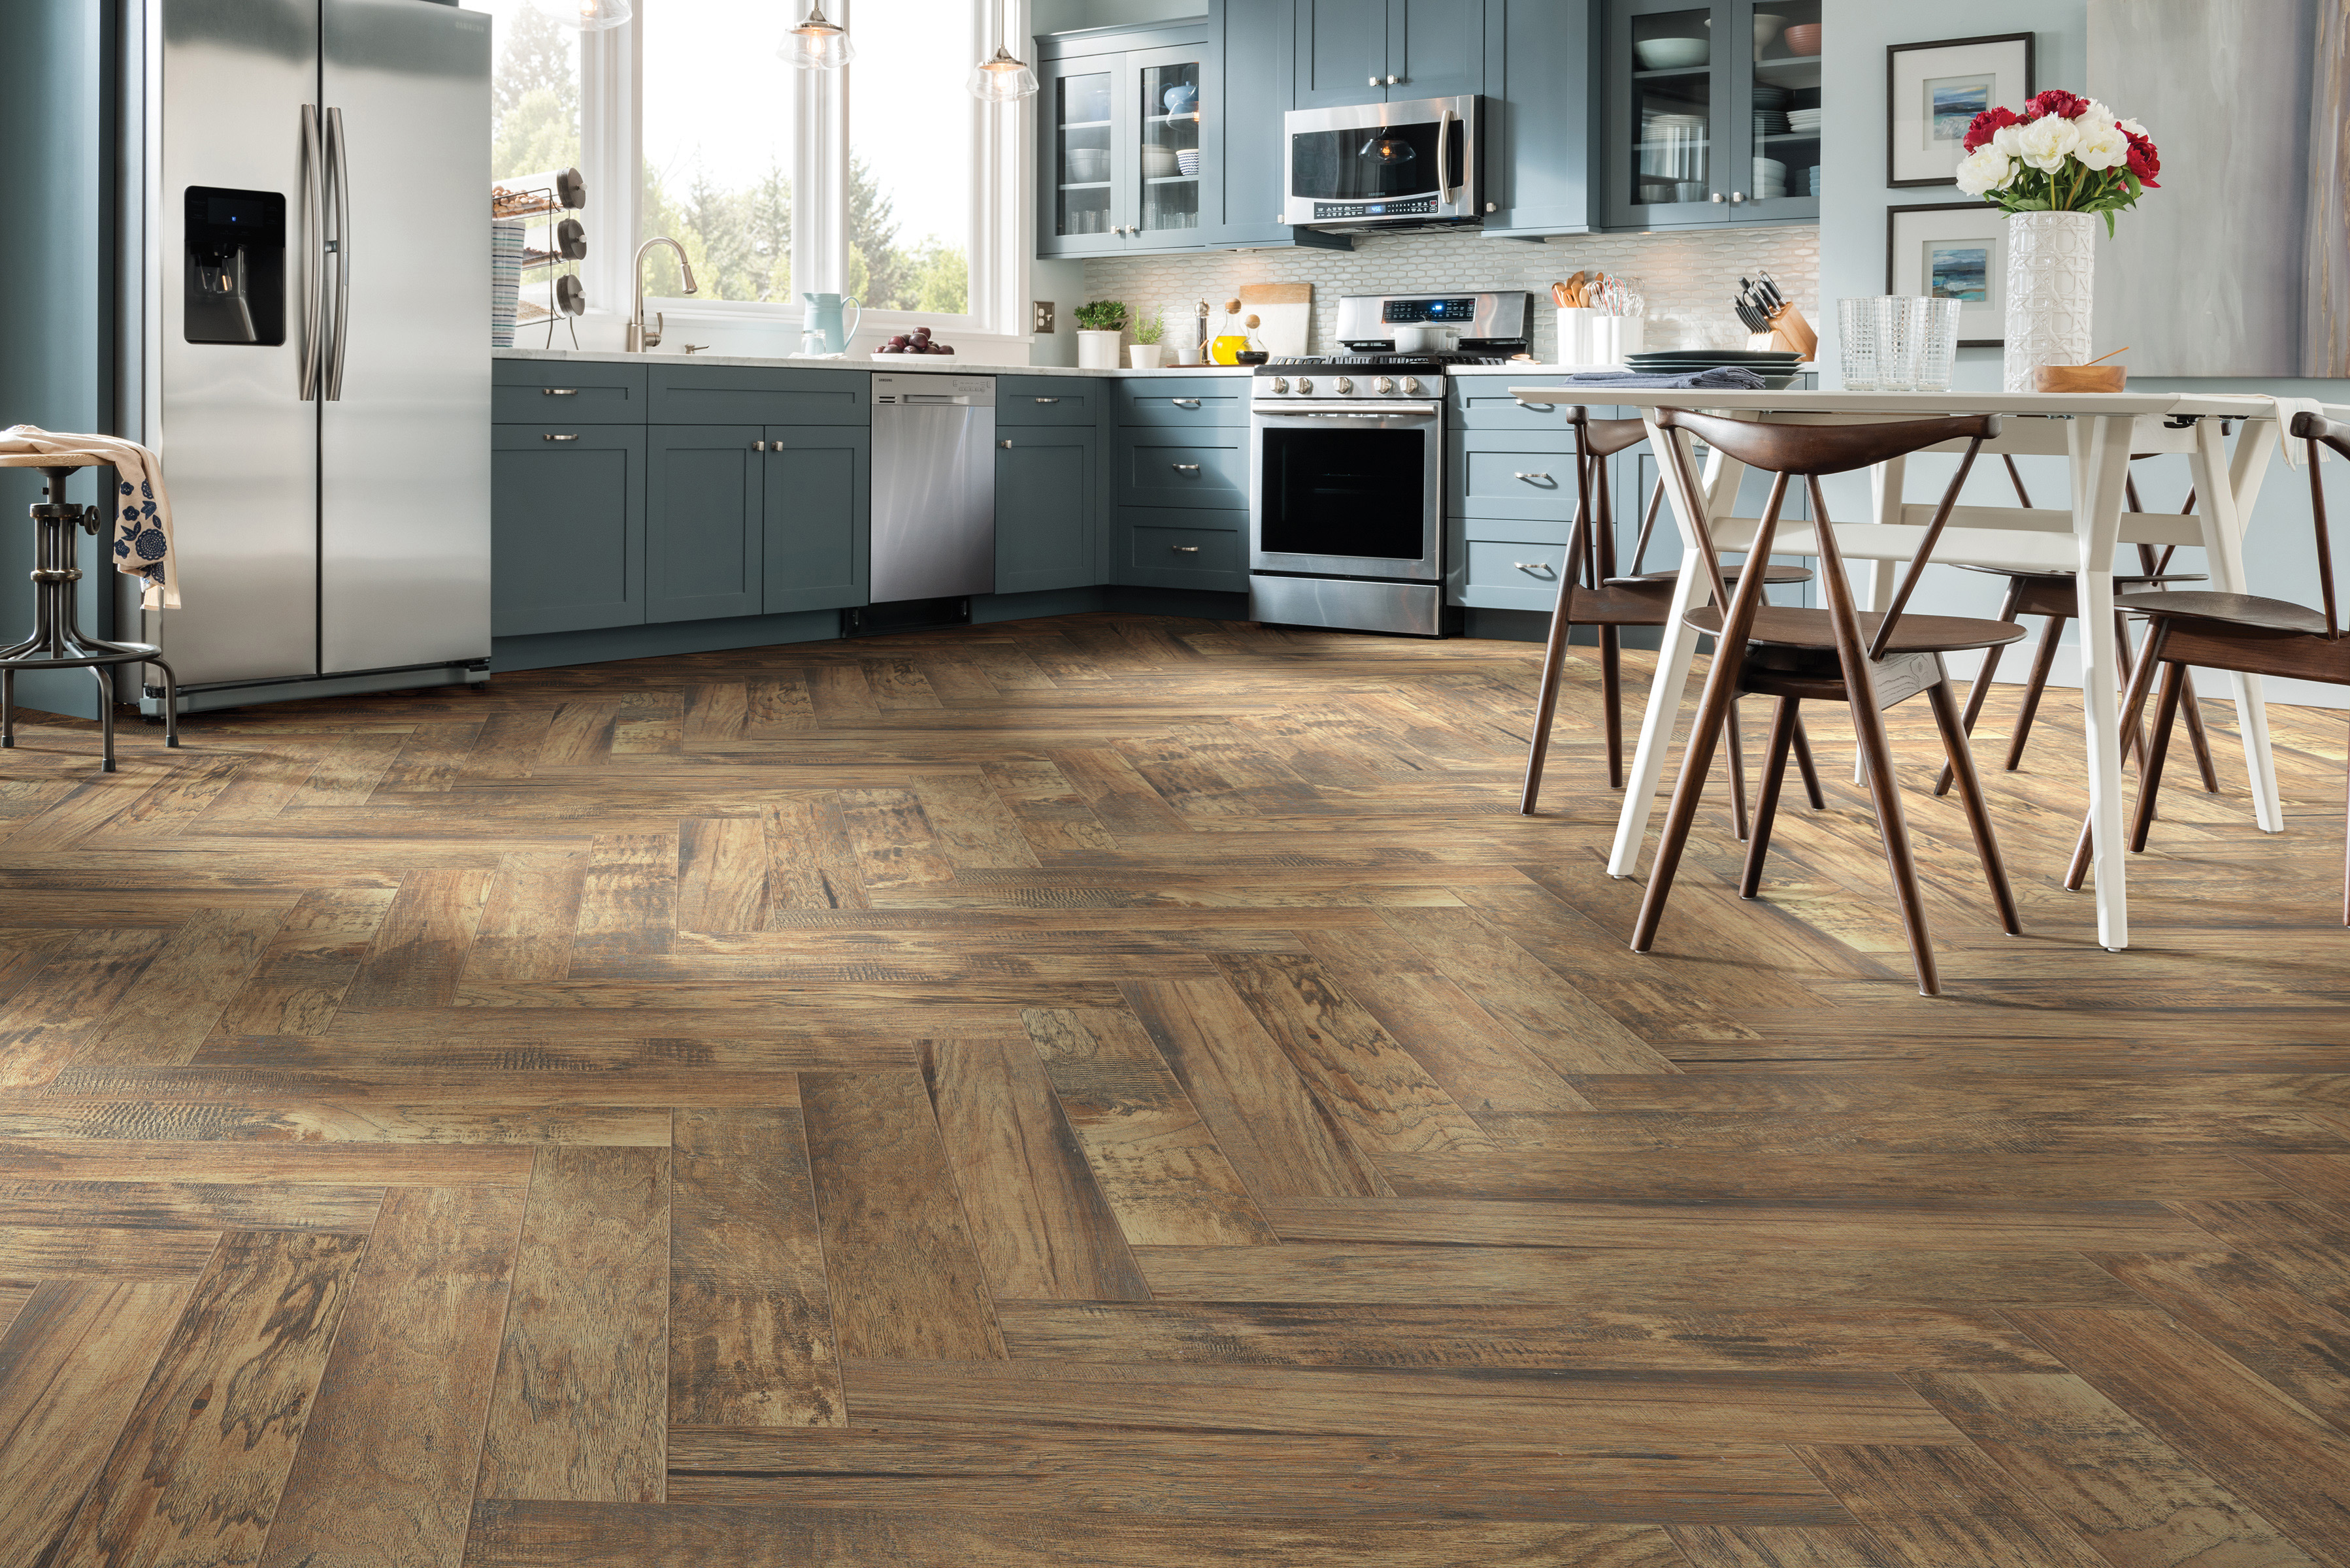 Hardwood flooring in a kitchen, installation services available